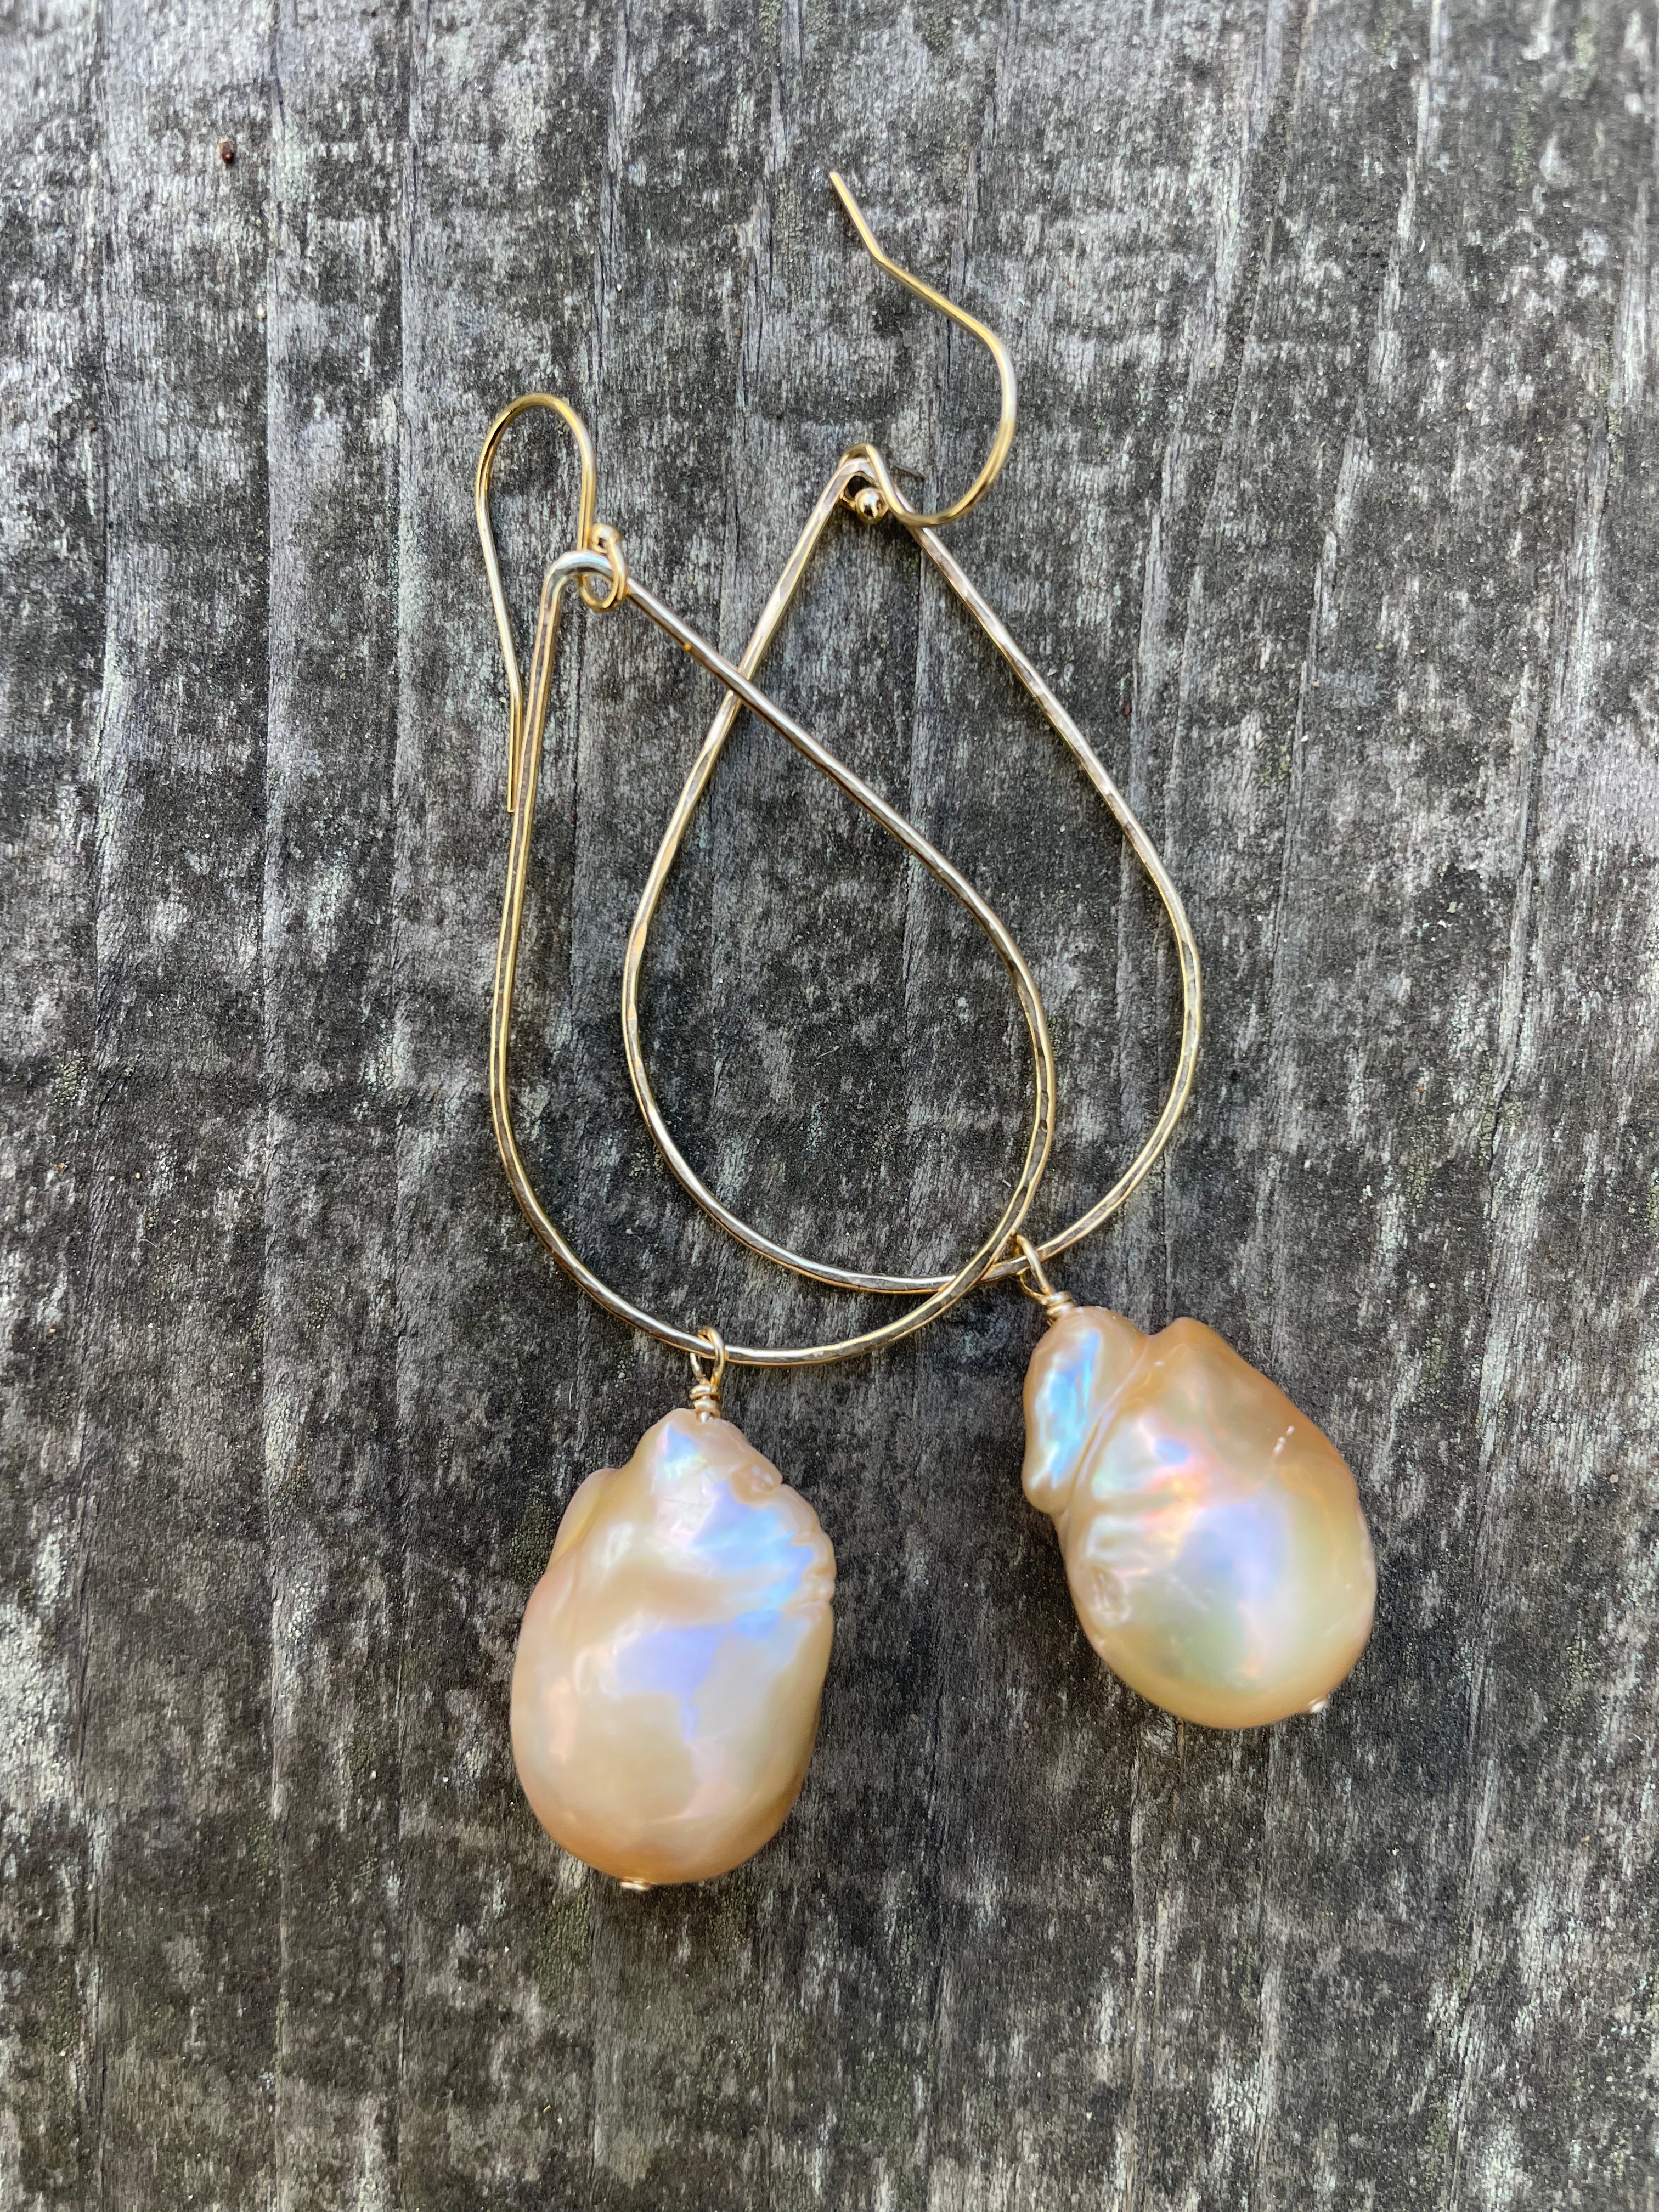 Large pink baroque fireball pearls hanging off of a teardrop shaped gold wire with ear wires on a wooden background.